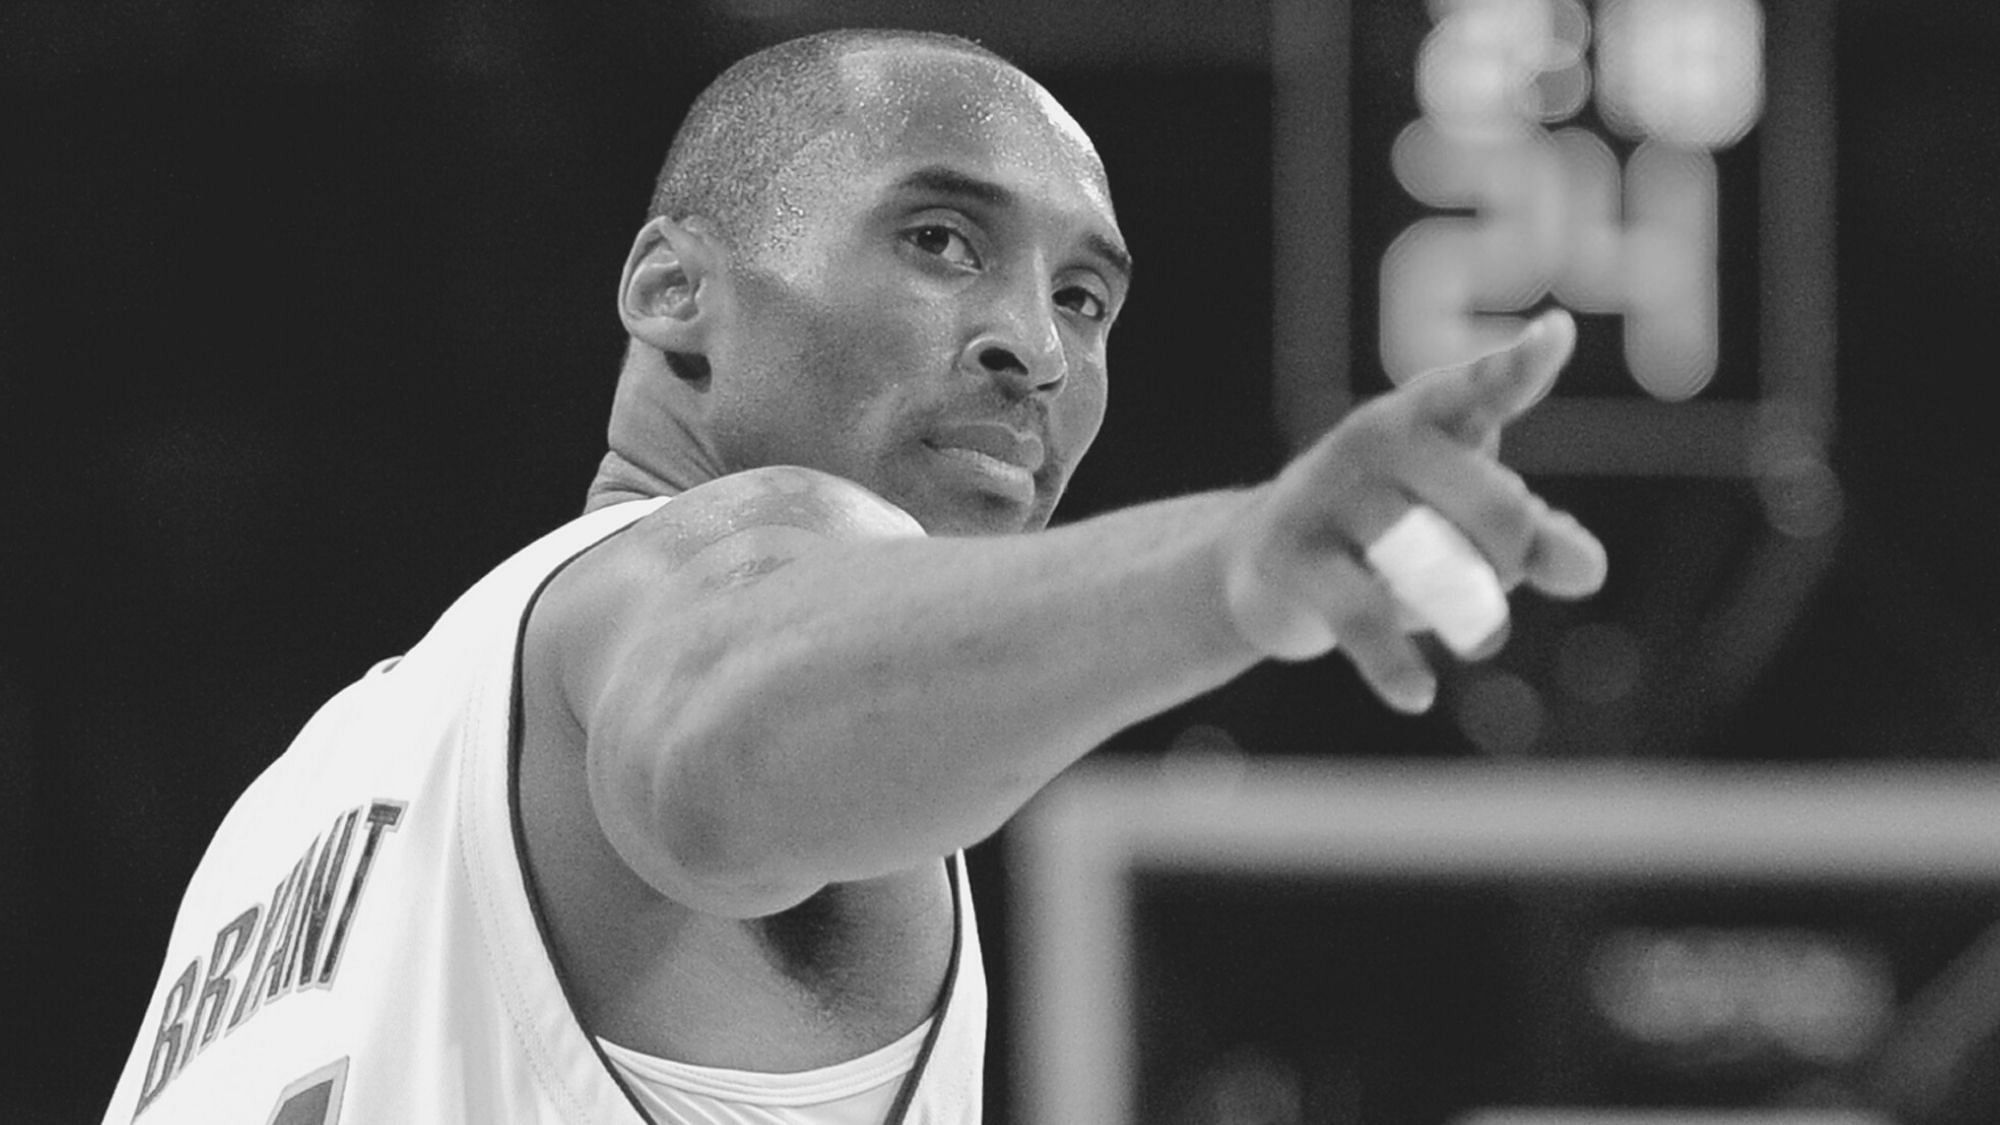 Kobe Bryant played for the Los Angeles Lakers in twenty-year career in the NBA and won five championships with them.